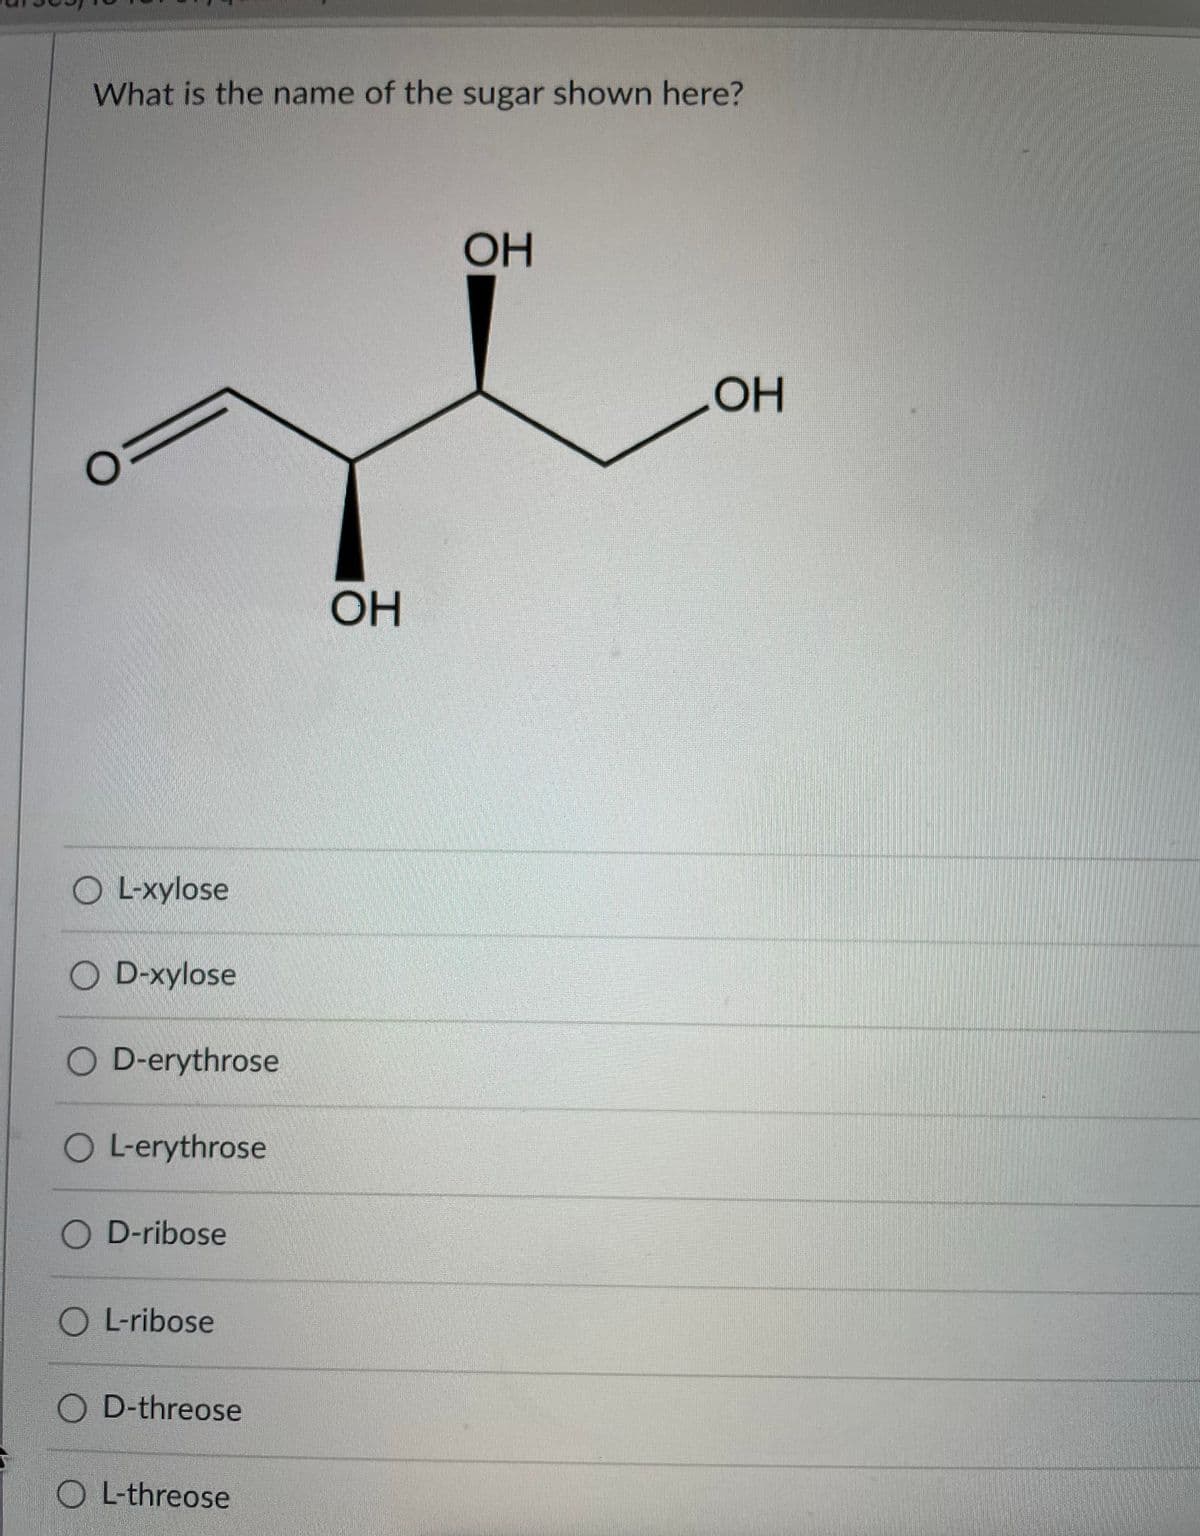 What is the name of the sugar shown here?
OH
OH
OH
O L-xylose
O D-xylose
O D-erythrose
O L-erythrose
O D-ribose
O L-ribose
O D-threose
O L-threose
